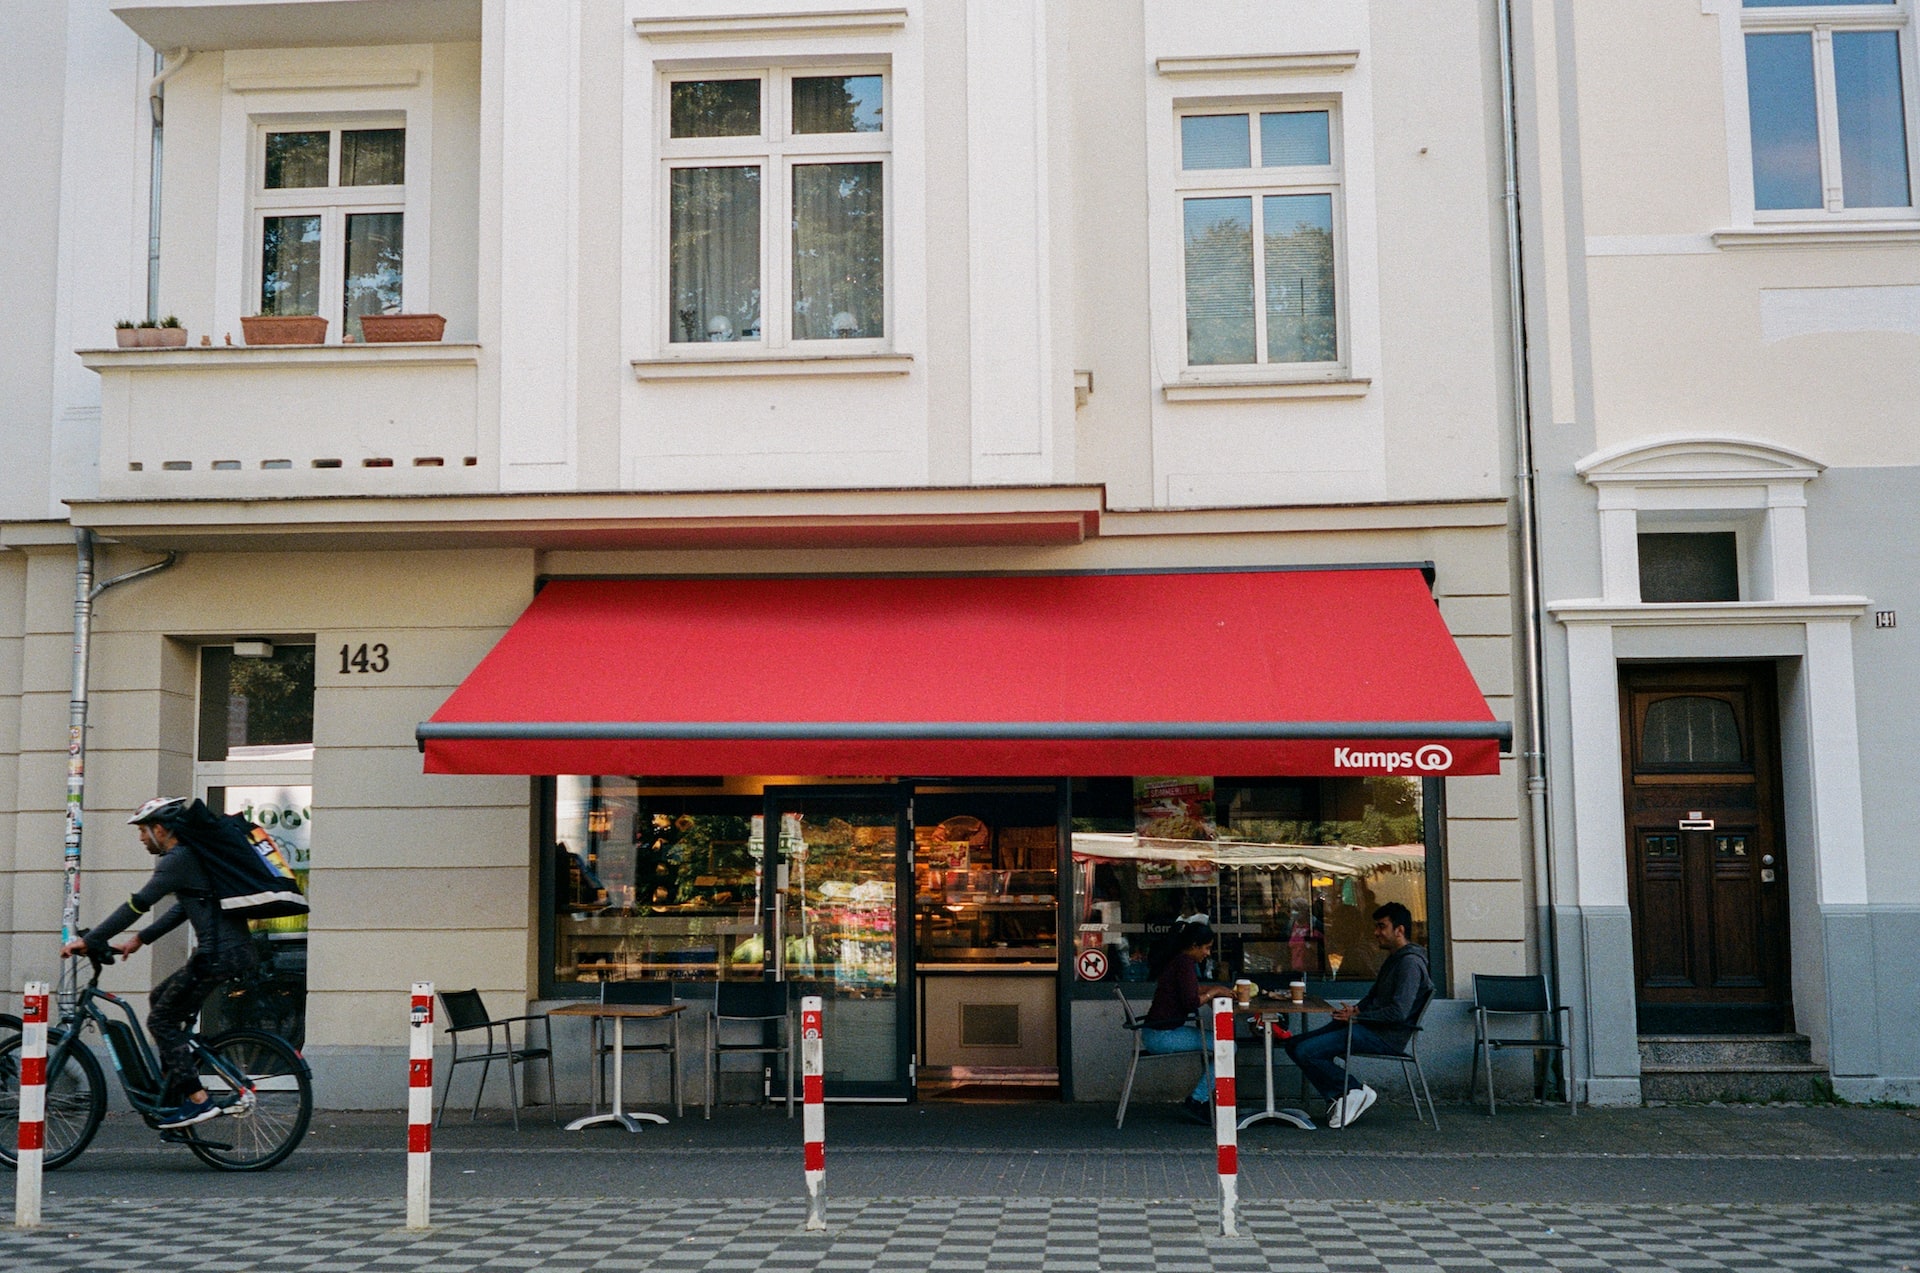 a man riding a bike past a red awning